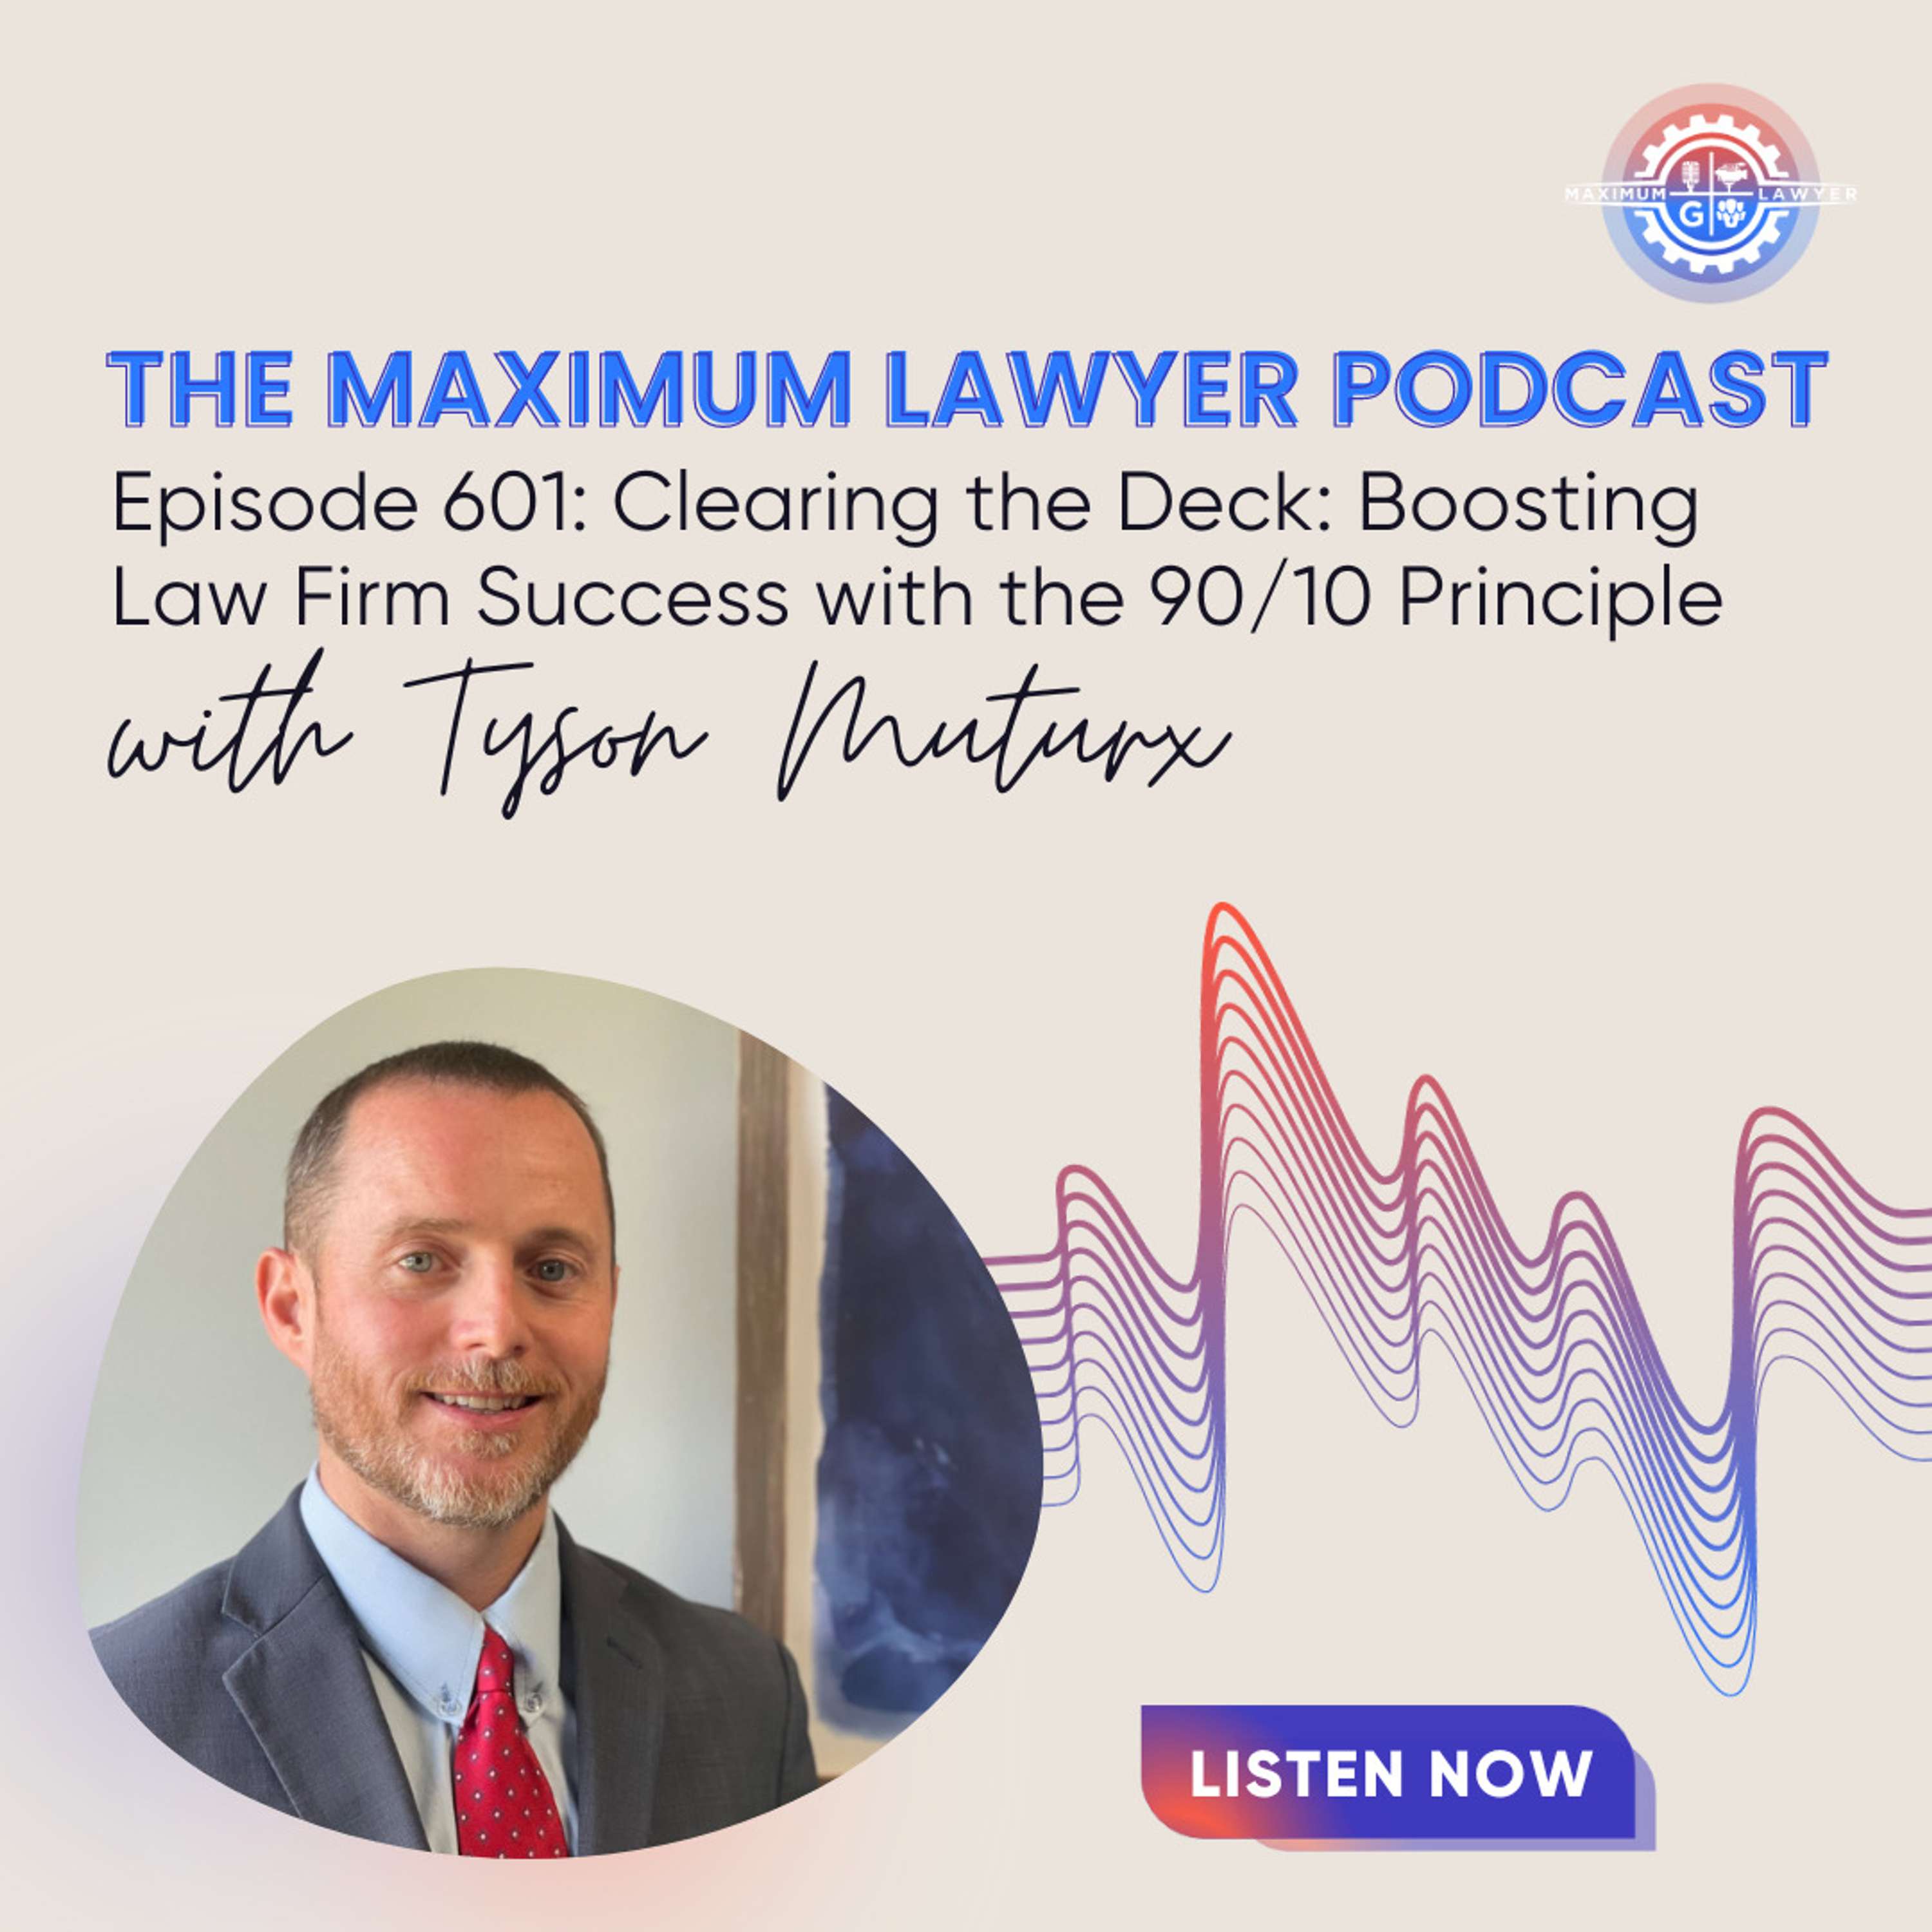 Clearing the Deck: Boosting Law Firm Success with the 90/10 Principle